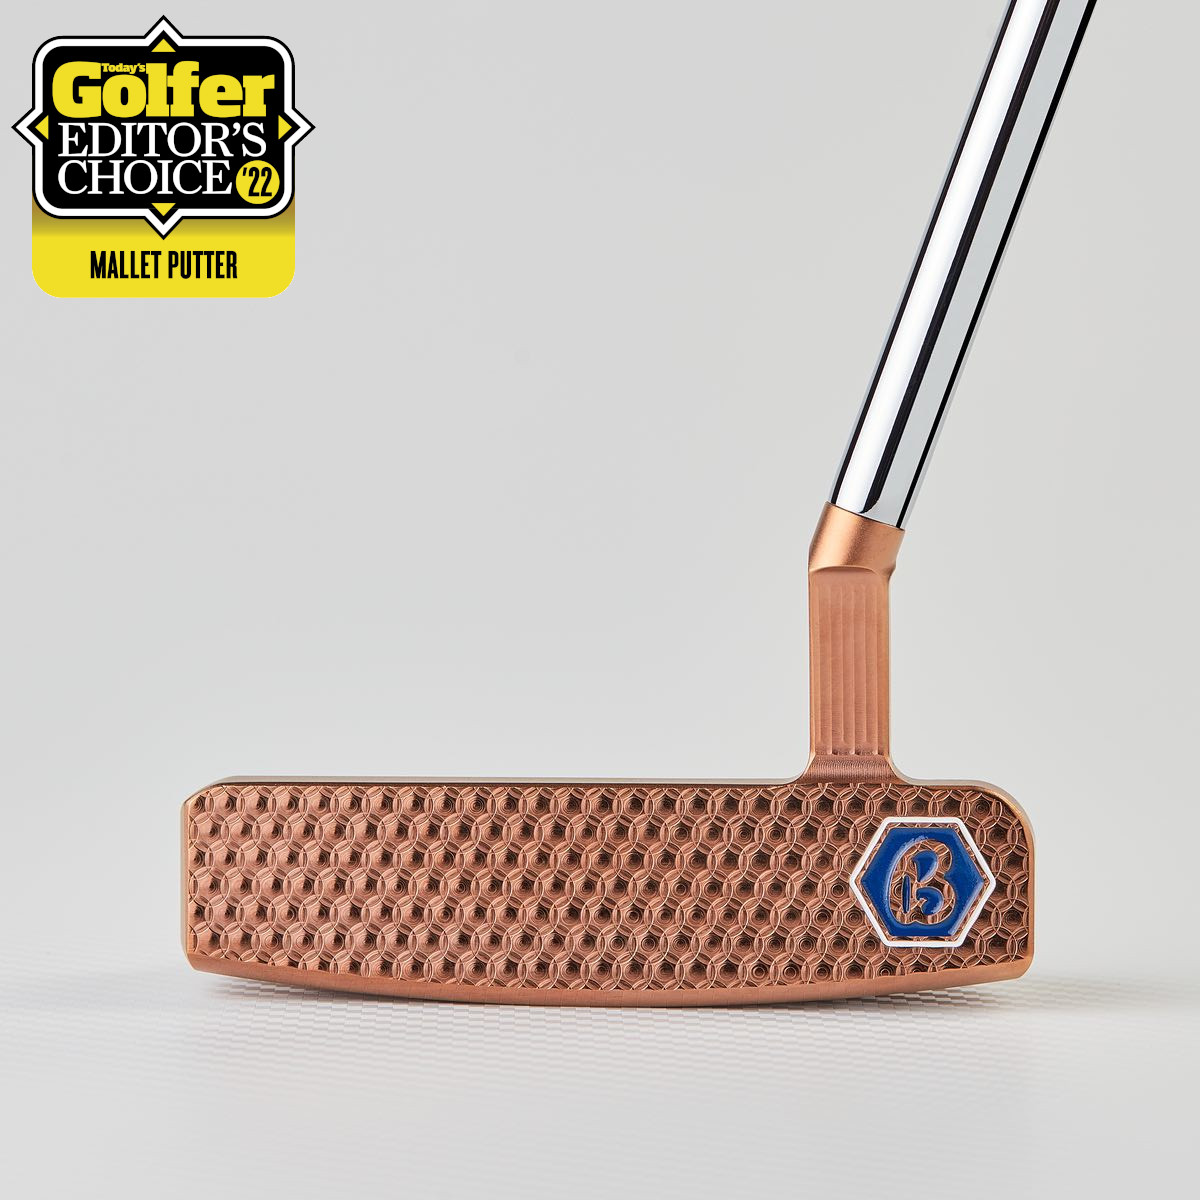 The Queen B 11, so good it one back-to-back awards with @TheTodaysGolfer making it our #putteroftheweek

The pairing of Rose Gold PVD and the Micro-Honeycomb face make for a truly stunning gamer 👌

#BettinardiGolf #Bettinardi #QueenB #AwardWinnng #MadeInTheUSA